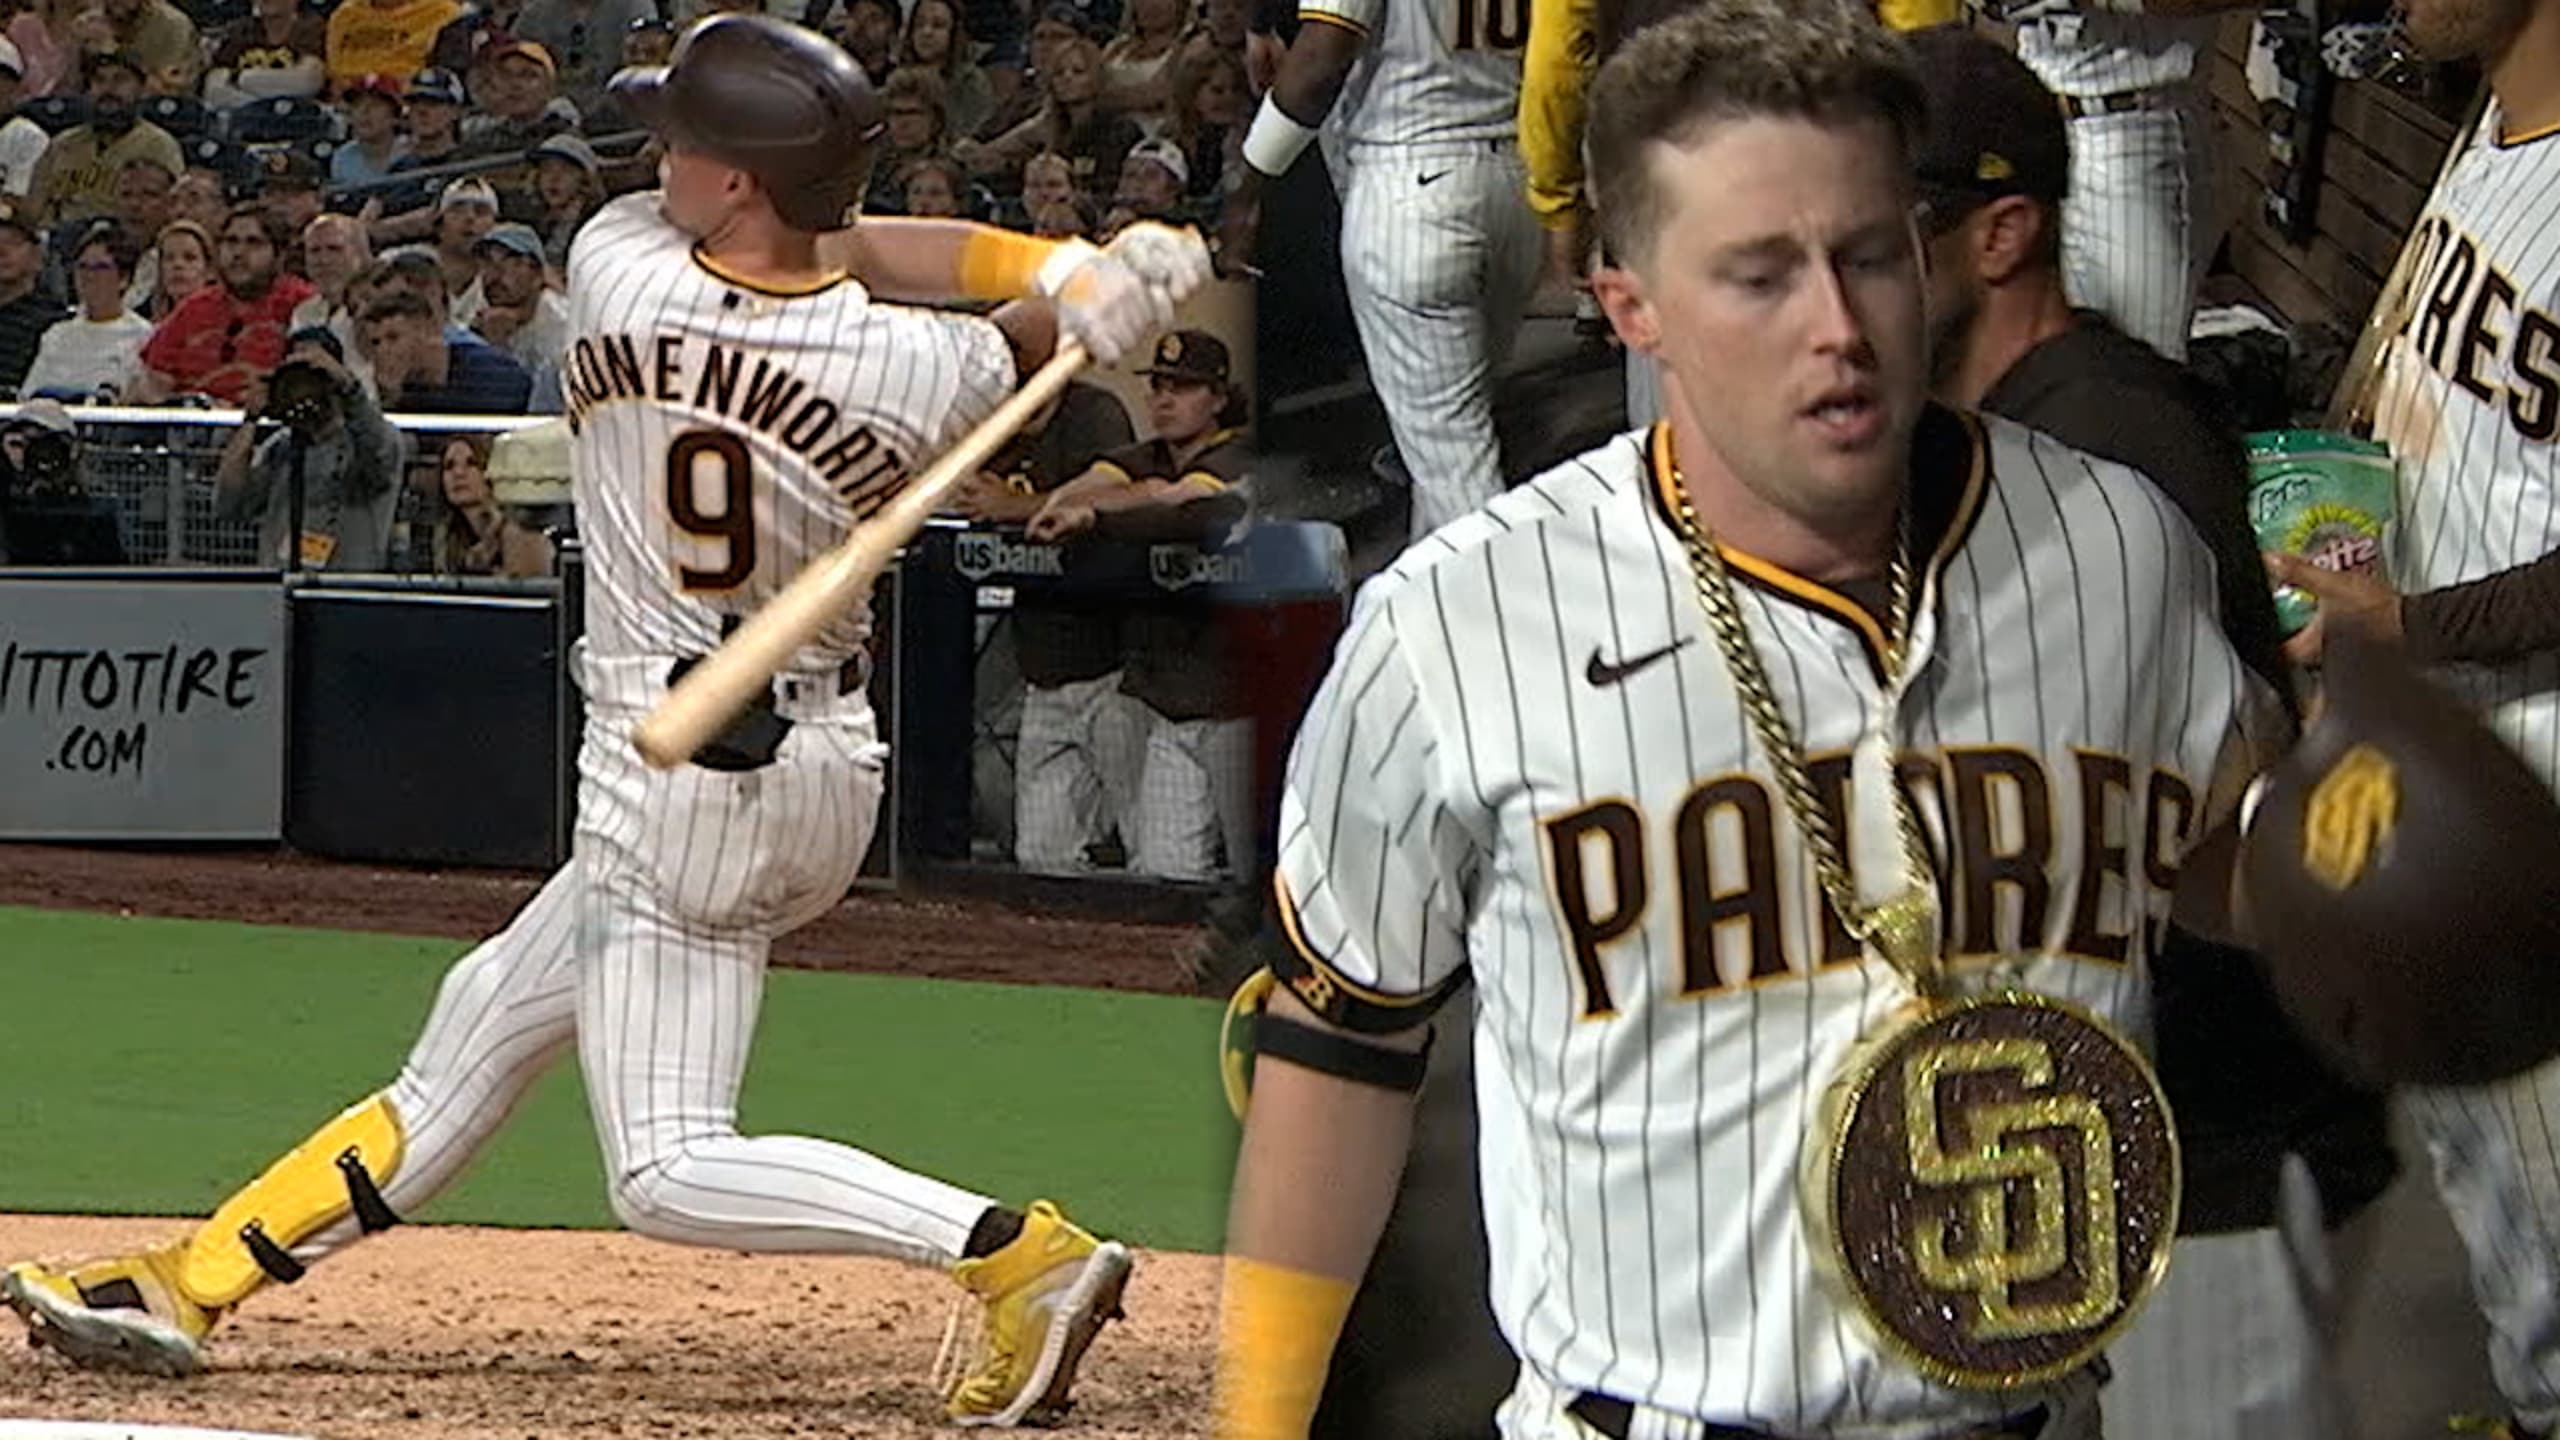 Jake Cronenworth hits dramatic homer, Padres win on walk-off wild pitch vs.  Phillies to stay in wild card spot 